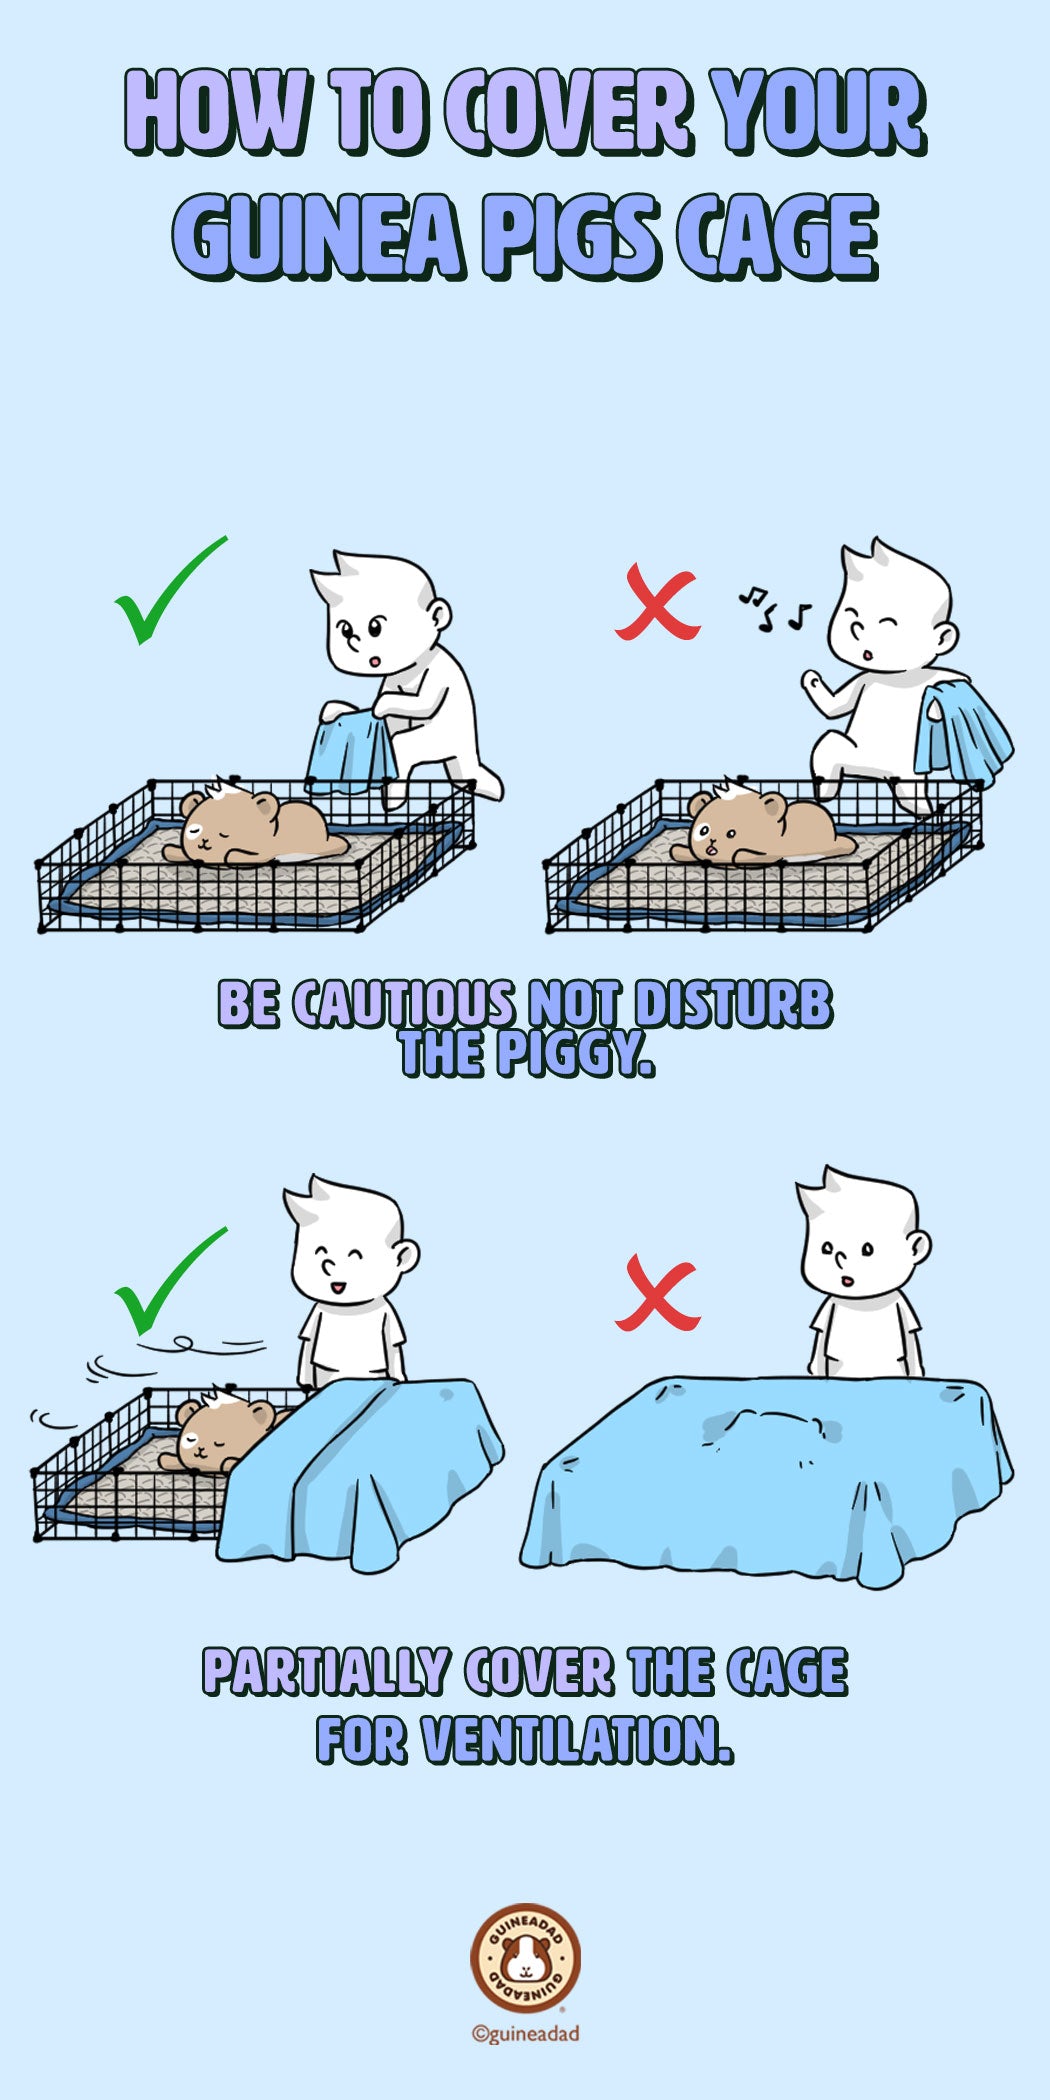 Can I cover my guinea pig's cage?